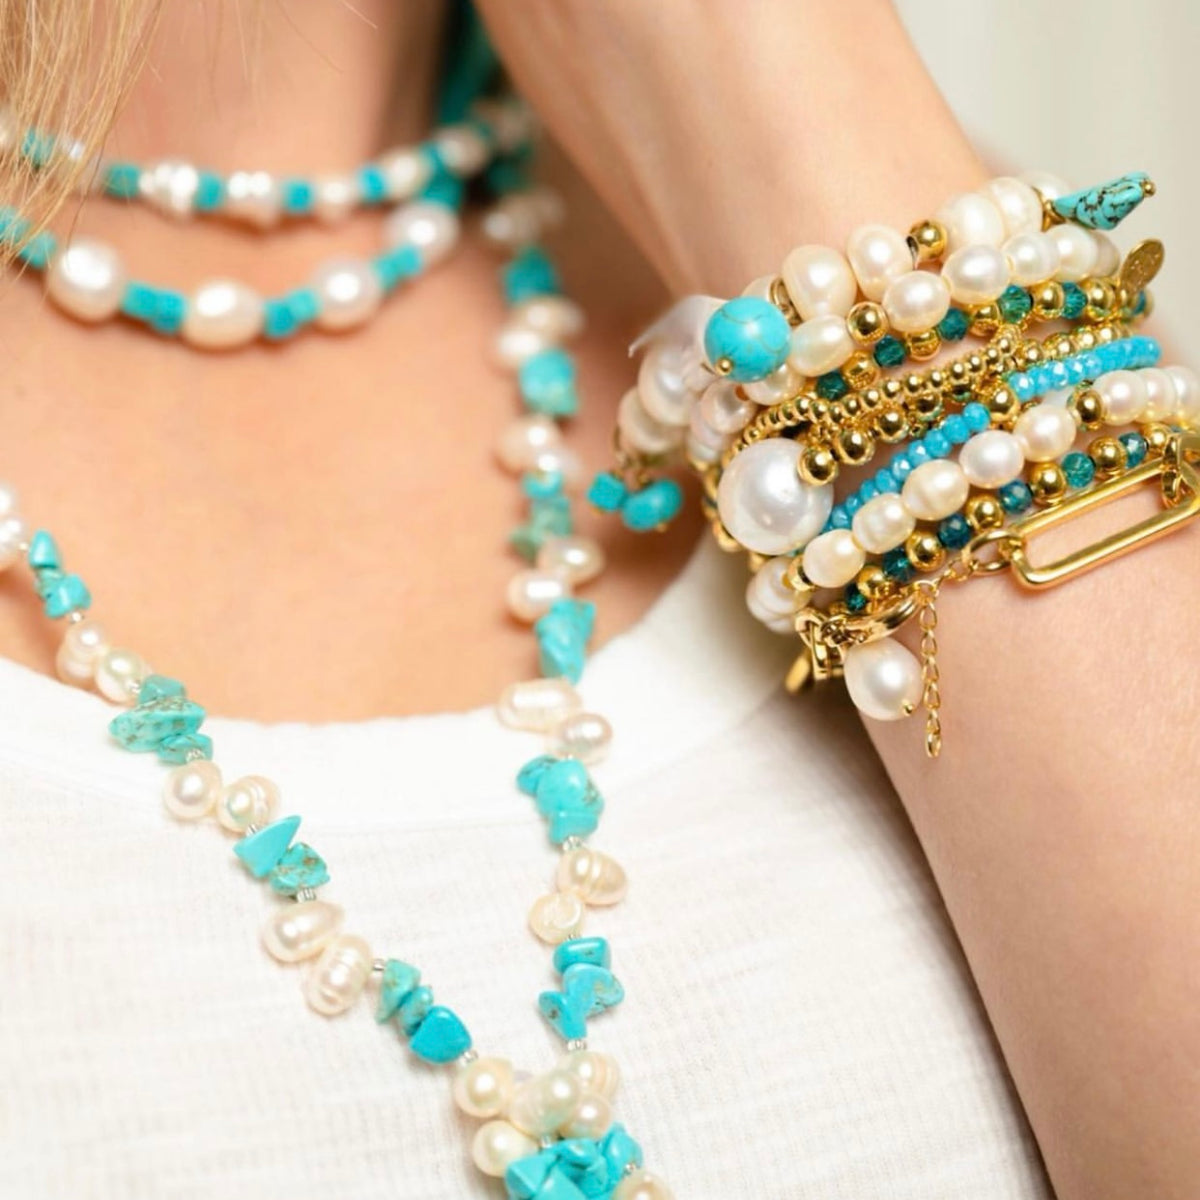 Lola Turquoise and Pearl Bracelet